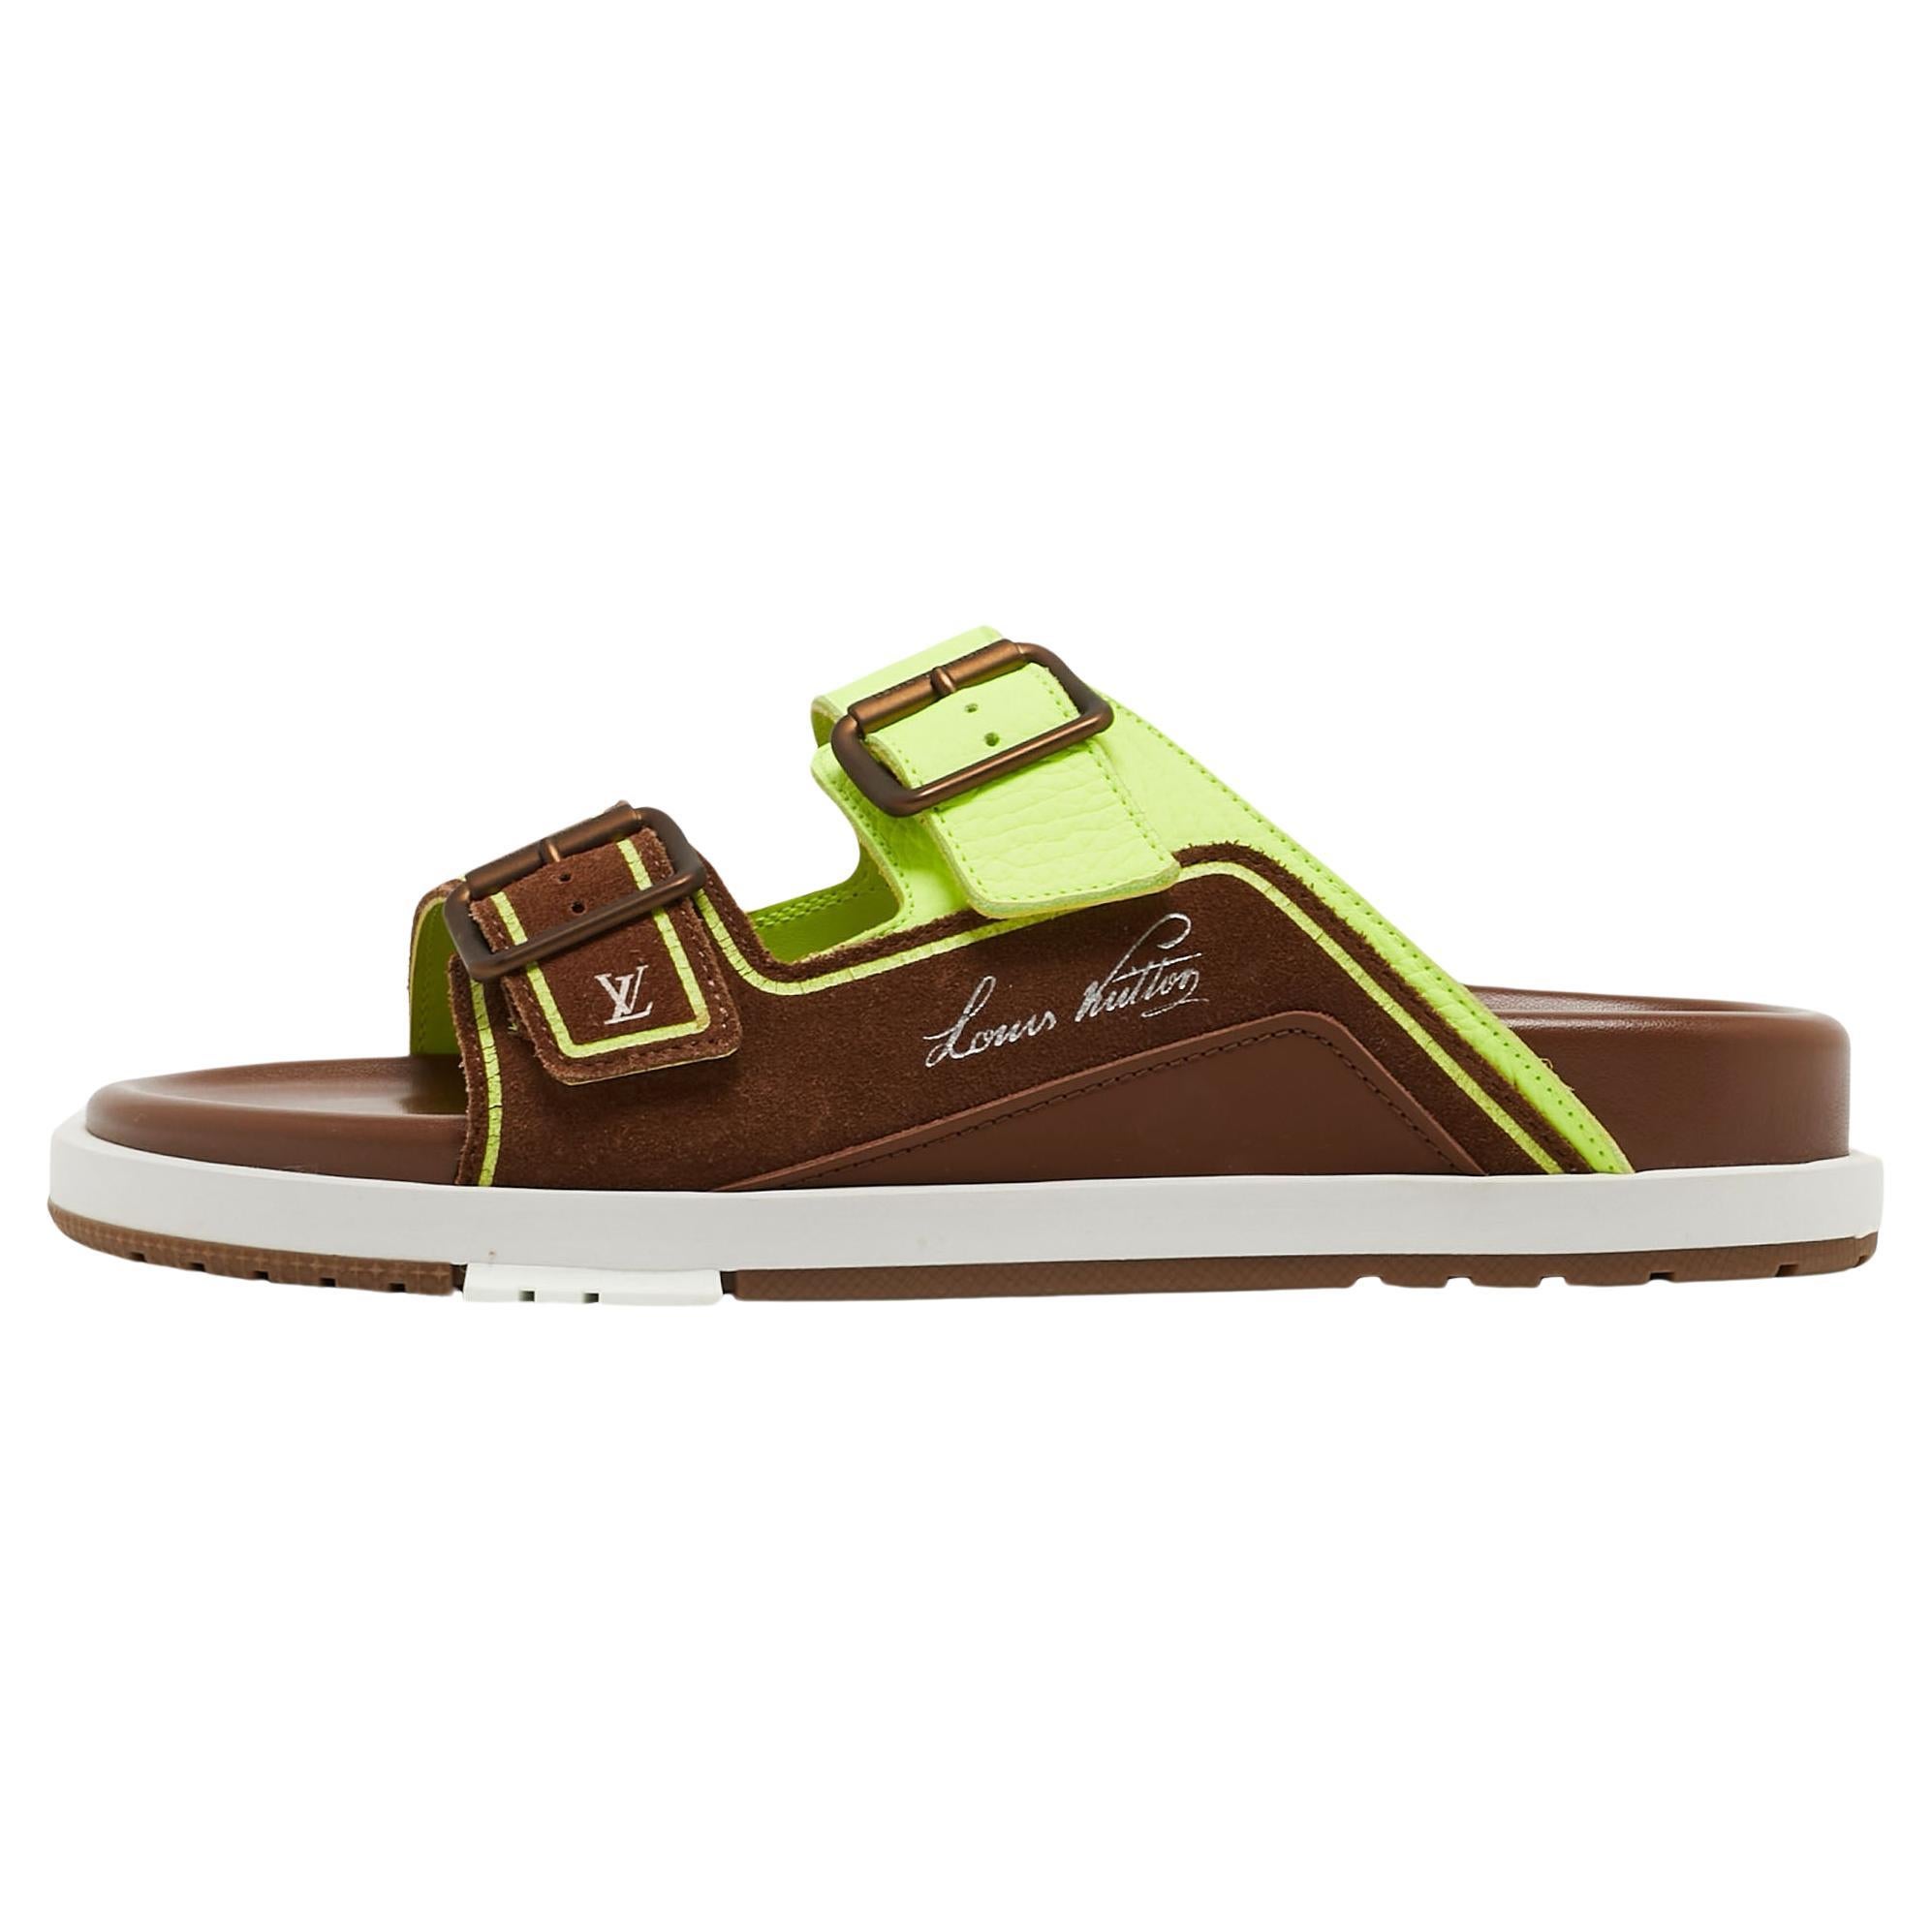 Louis Vuitton Brown/Neon Green Suede and Leather LV Trainer Mules Size 42